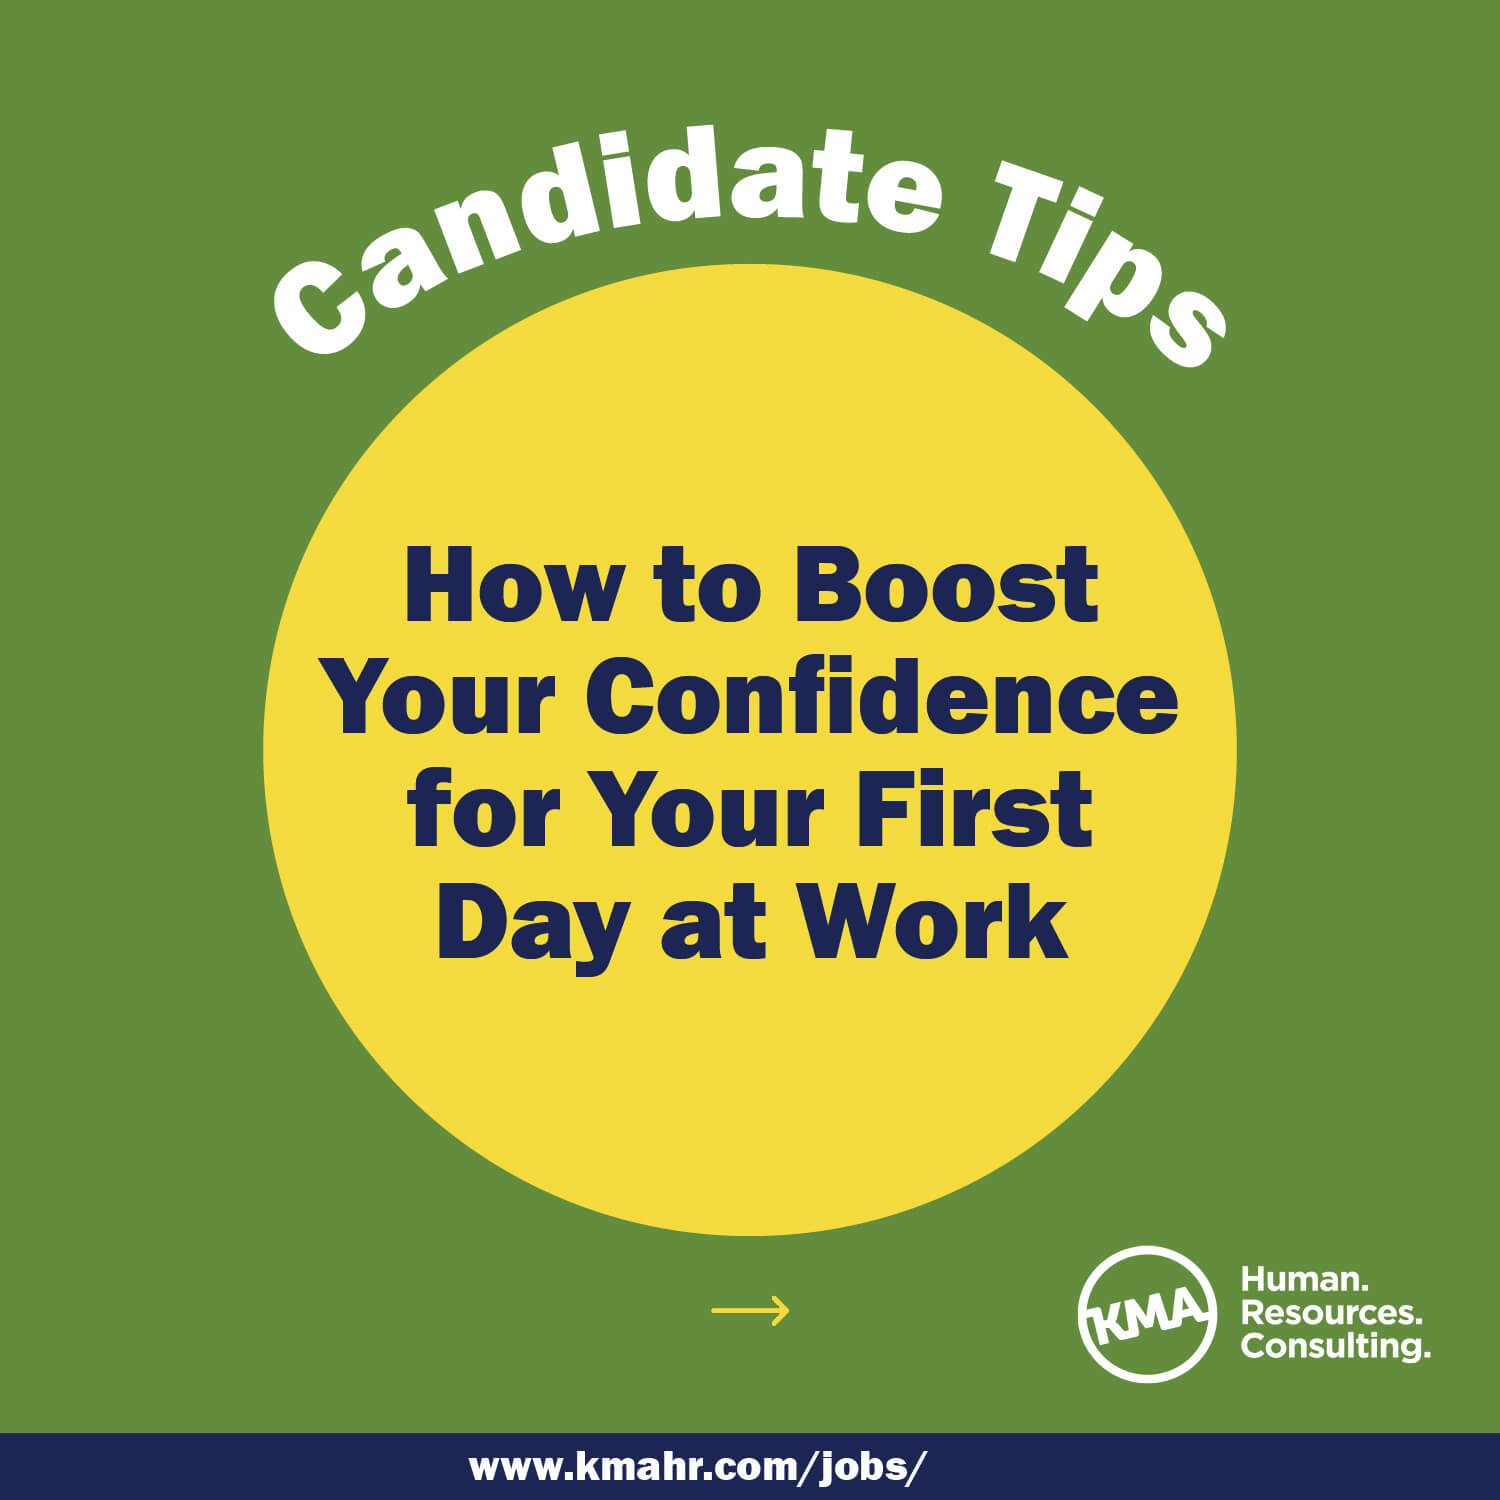 Candidate Tips 3.10